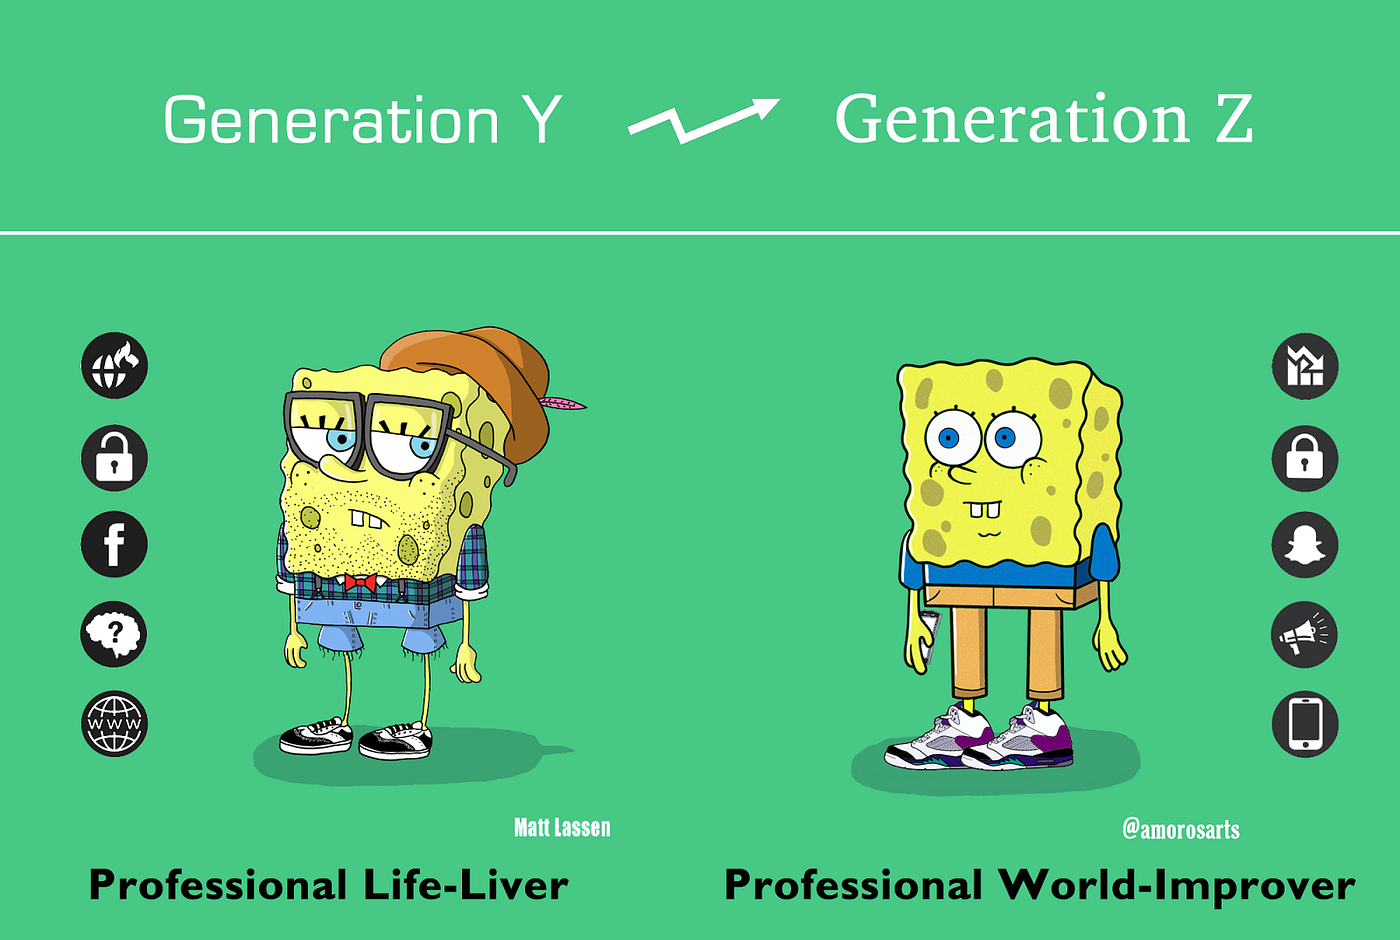 Shifts from Generation Y to Generation Z | by Stamina A | The Future of  Things | Medium